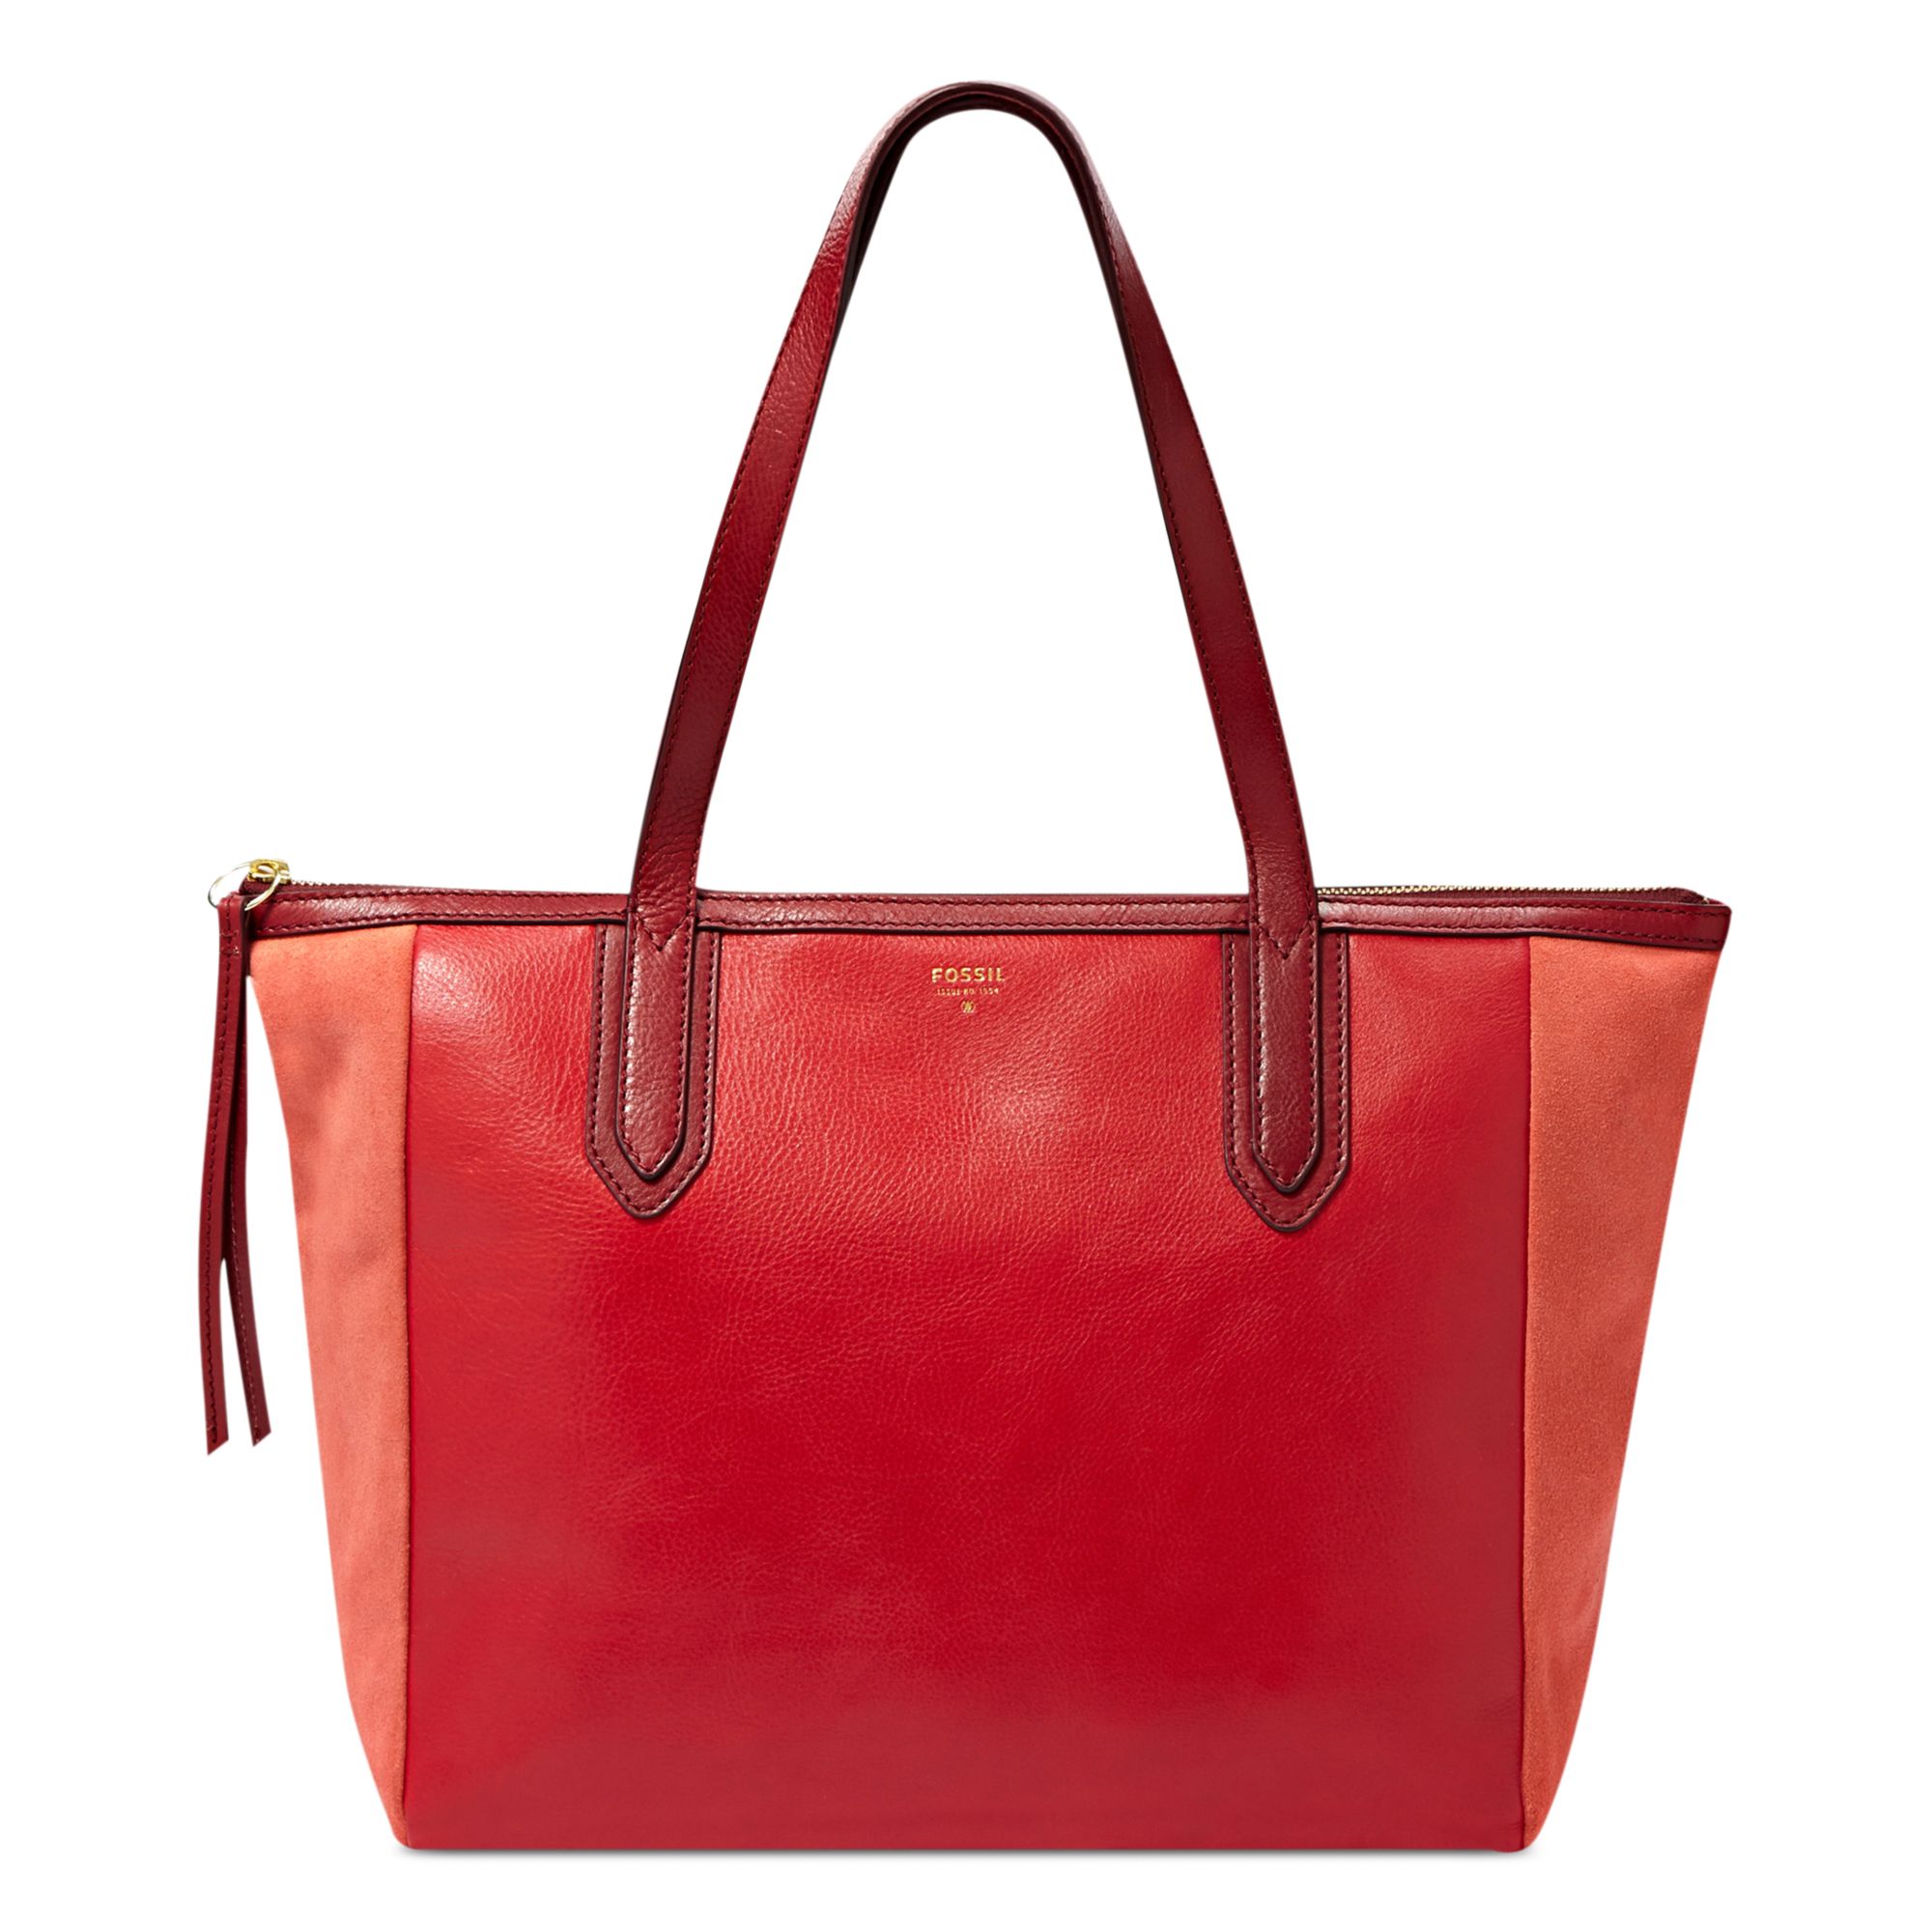 Fossil Sydney Leather Shopper in Red (REAL RED) | Lyst